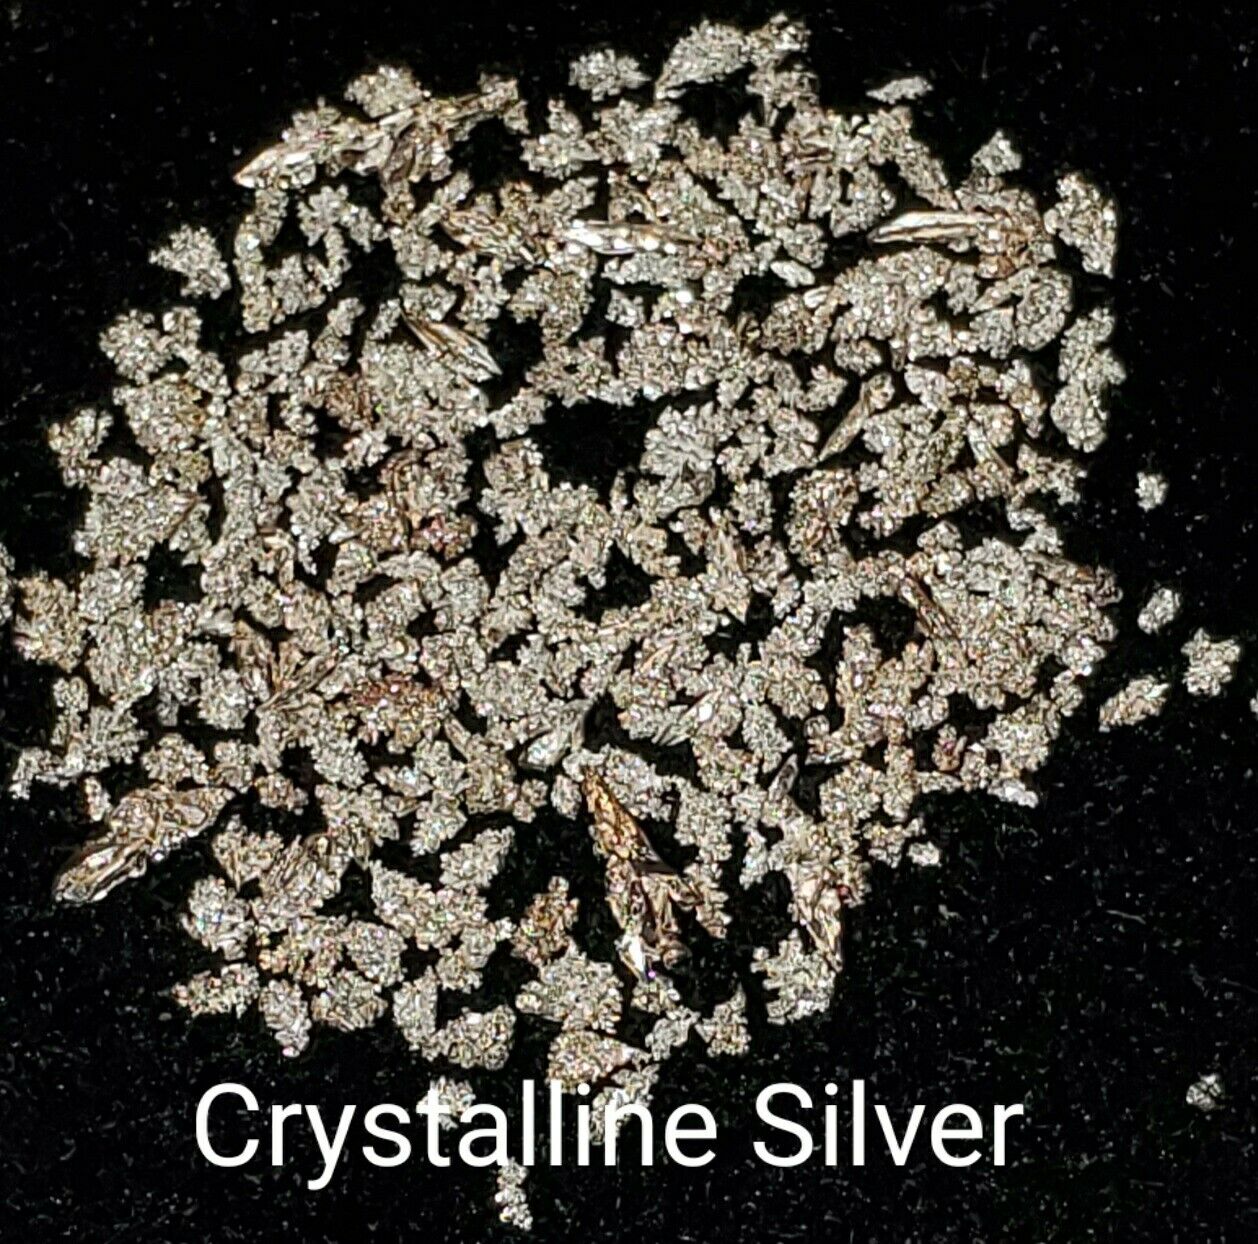 Natural Small Nevada Crystalline Silver Nuggets Mining Bullion Friend to Gold